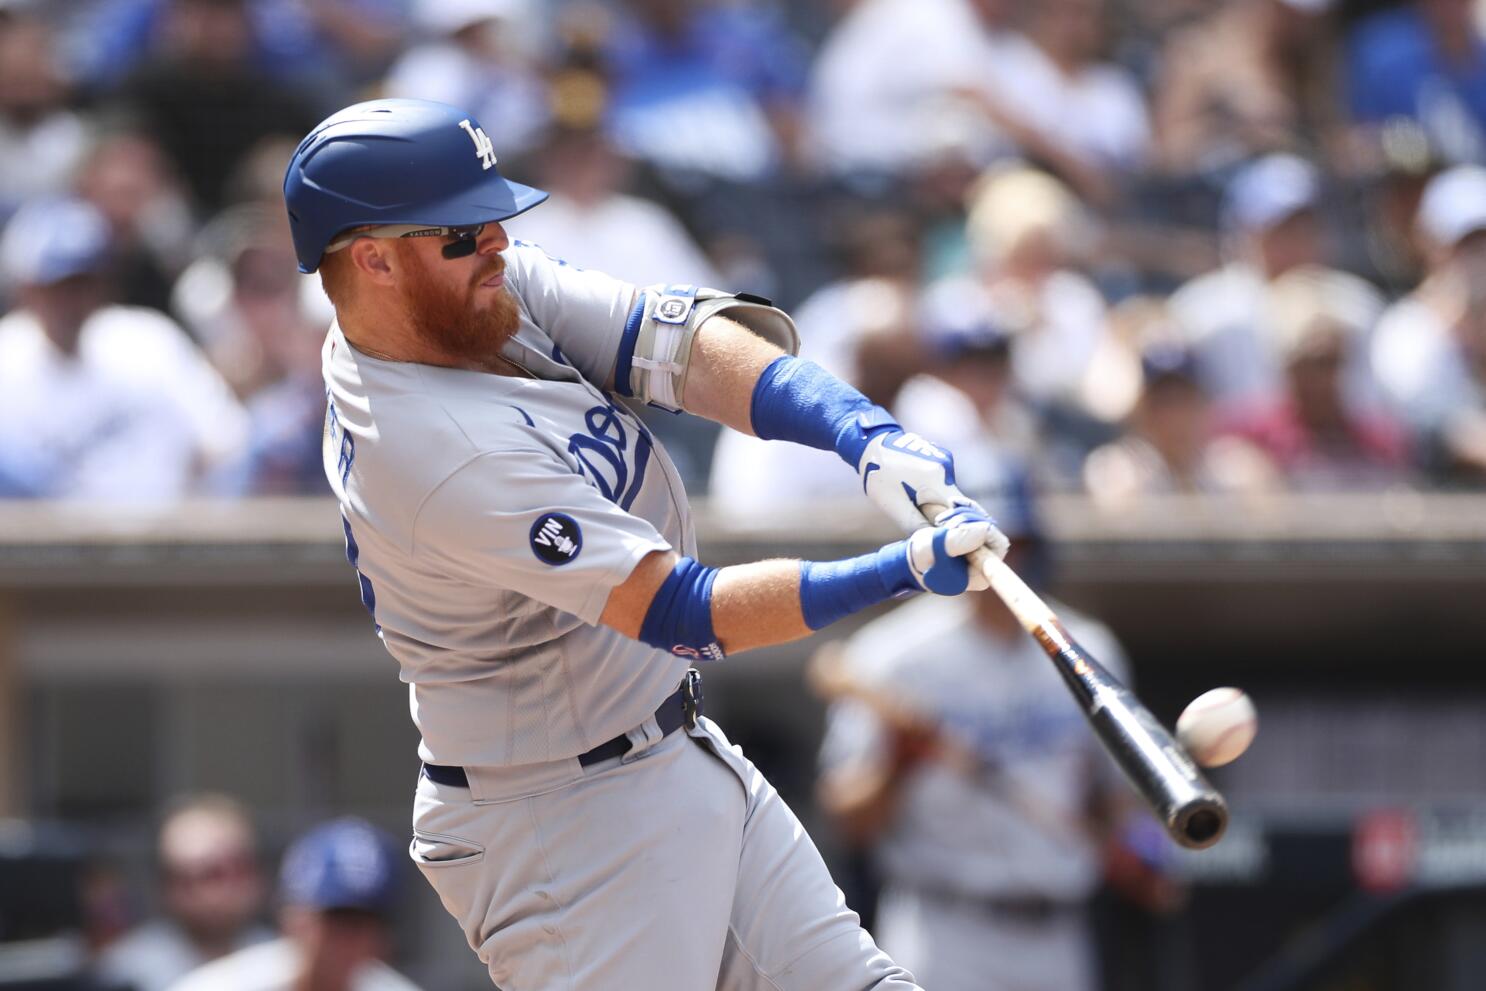 Red Sox sign former Dodgers All-Star Turner to 1-year deal - The